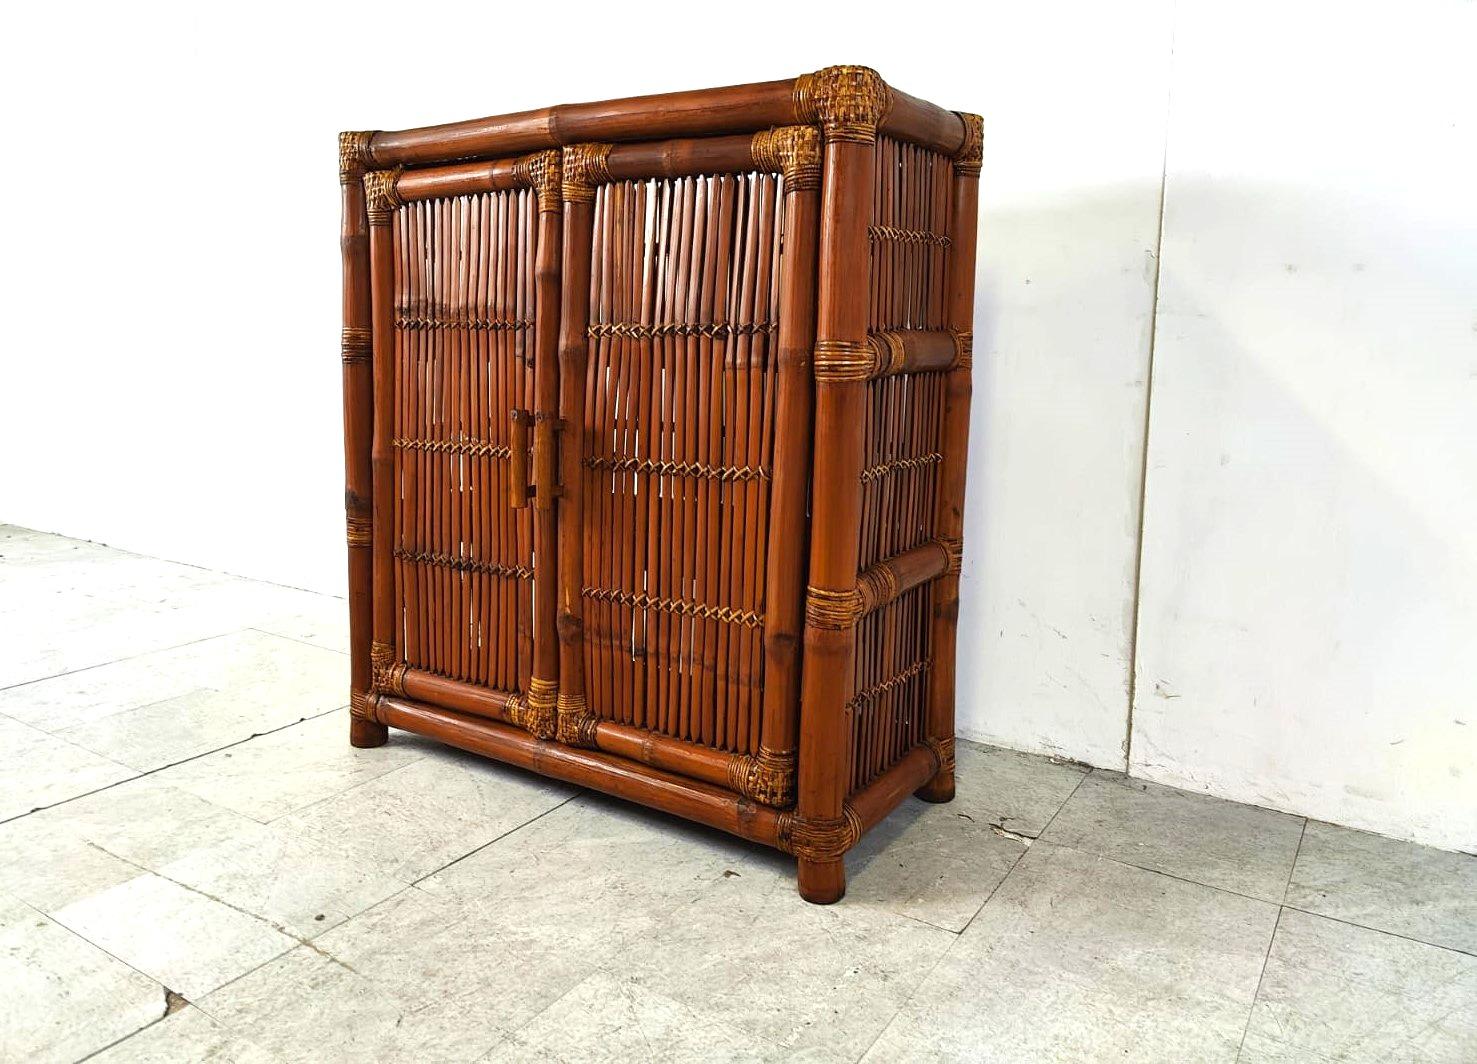 Vintage bamboo two door cabinet.

Cool bohemian style cabinet, which fits in most interiors.

1970s - France

Good condition

Dimensions:
Height: 102cm
Width: 93cm
Depth: 43cm

Ref.: 441522